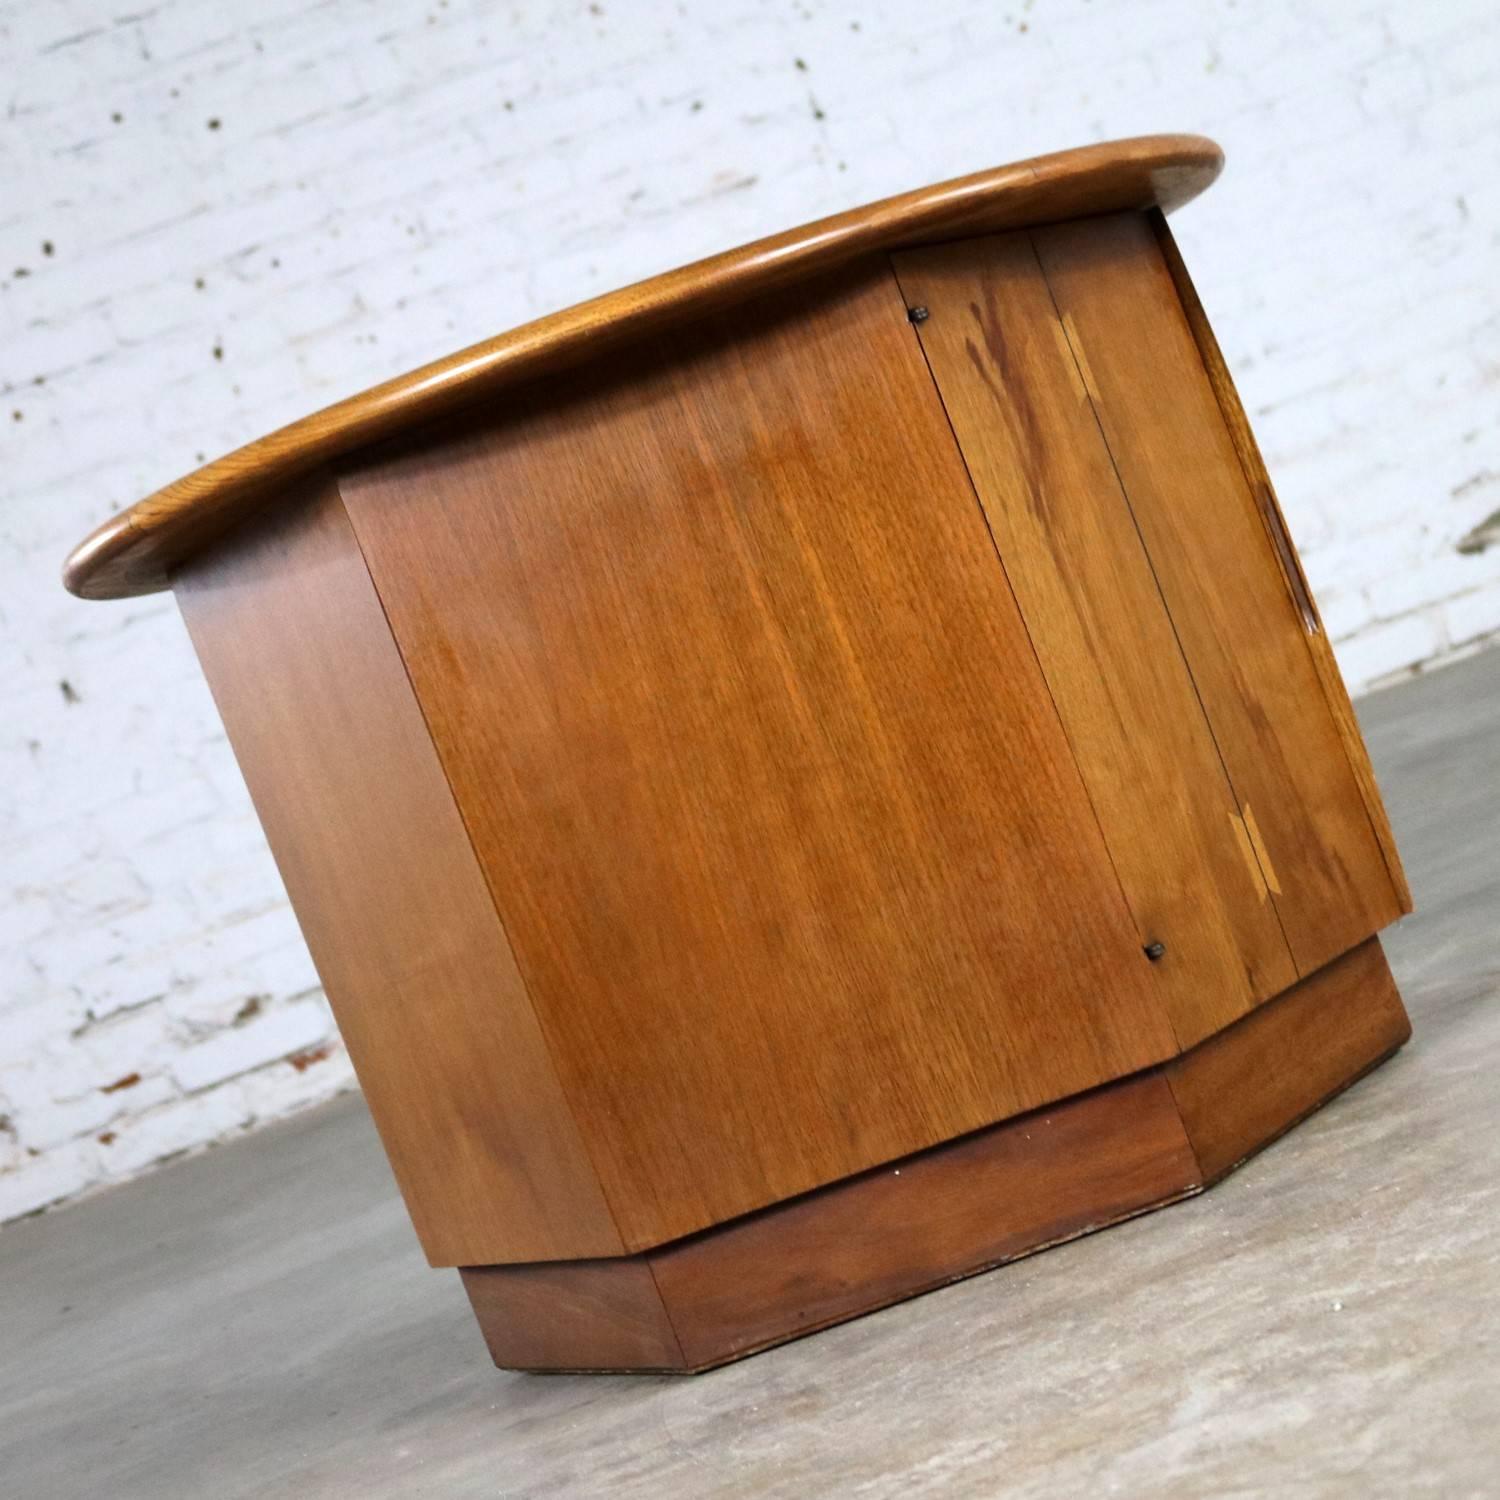 20th Century Lane Acclaim Dovetail End Table Round Top and Hexagon Cabinet Base by Andre Bus